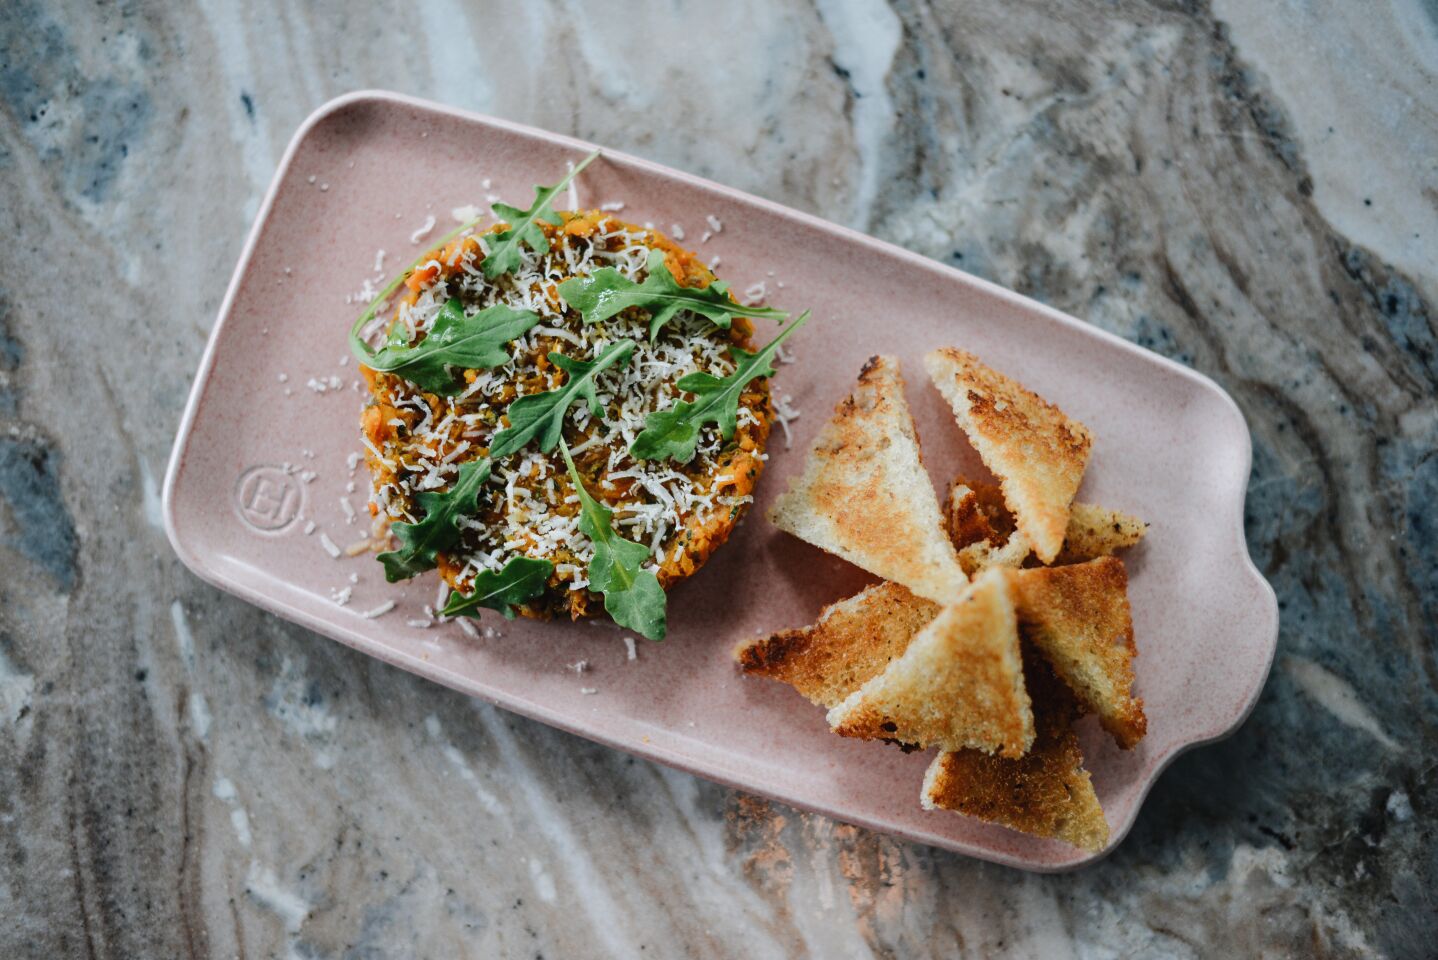 The carrot tartare is garnished with pecorino, arugula and Texas toast points.